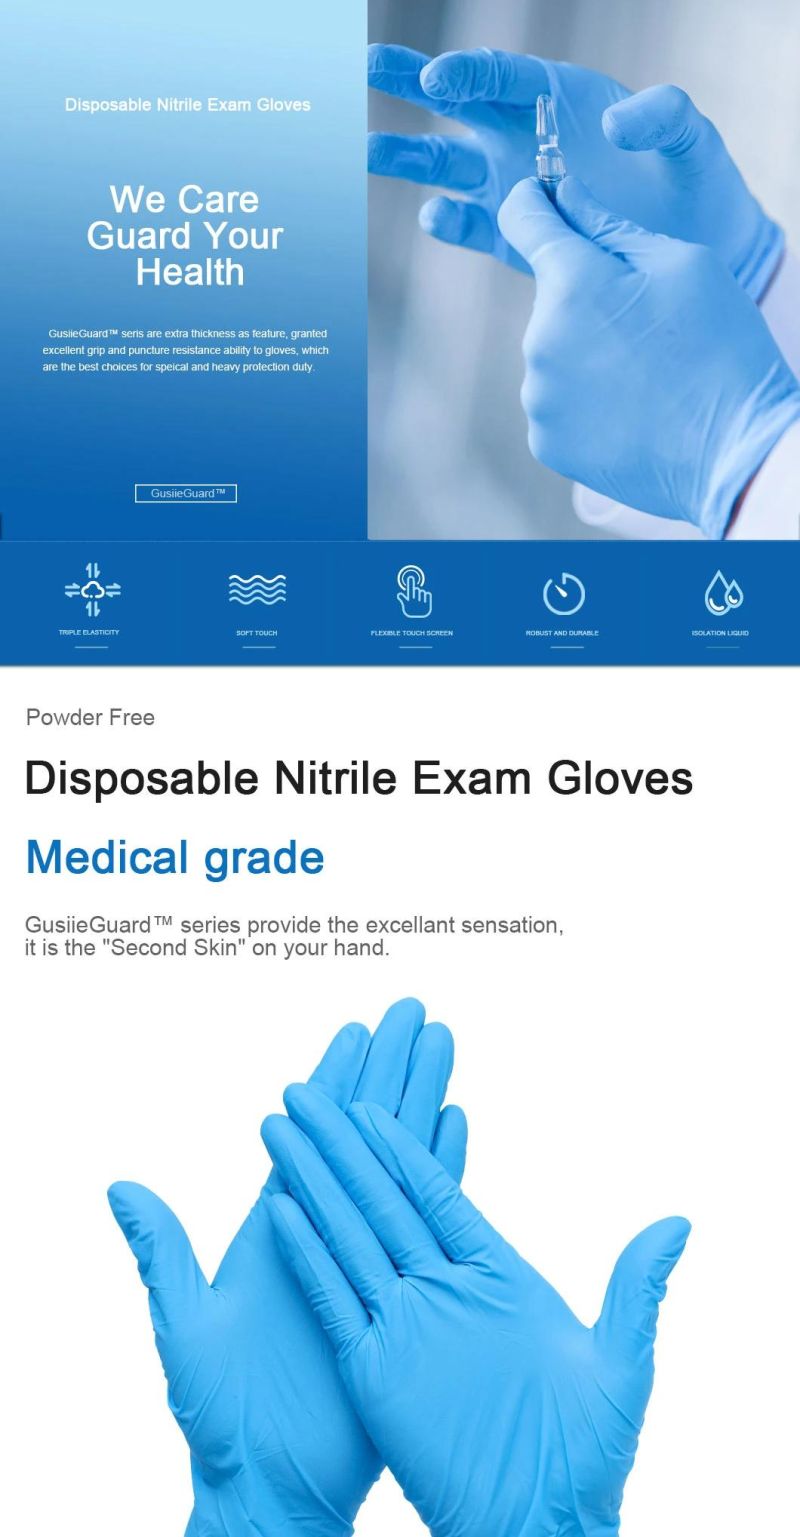 Customizable Nitrile Gloves Disposable Powder-Free Gloves with High Quality